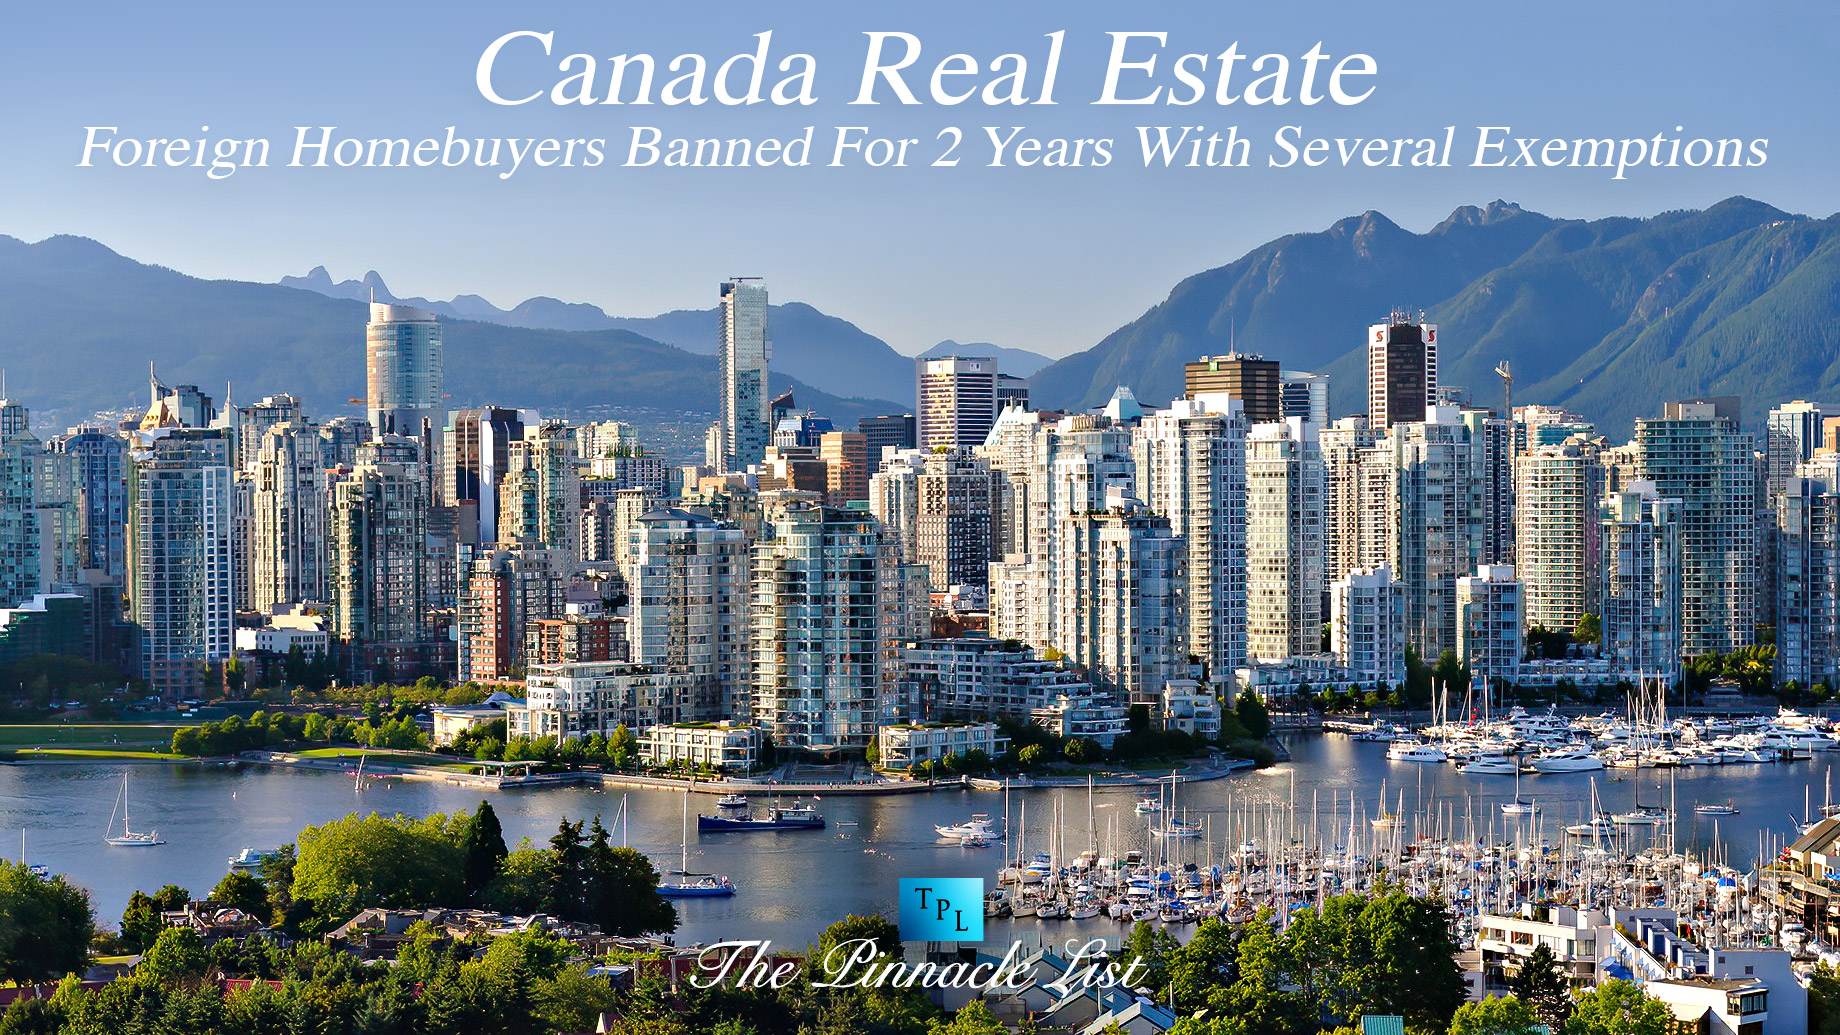 Canada Real Estate: Foreign Homebuyers Banned For 2 Years With Several Exemptions